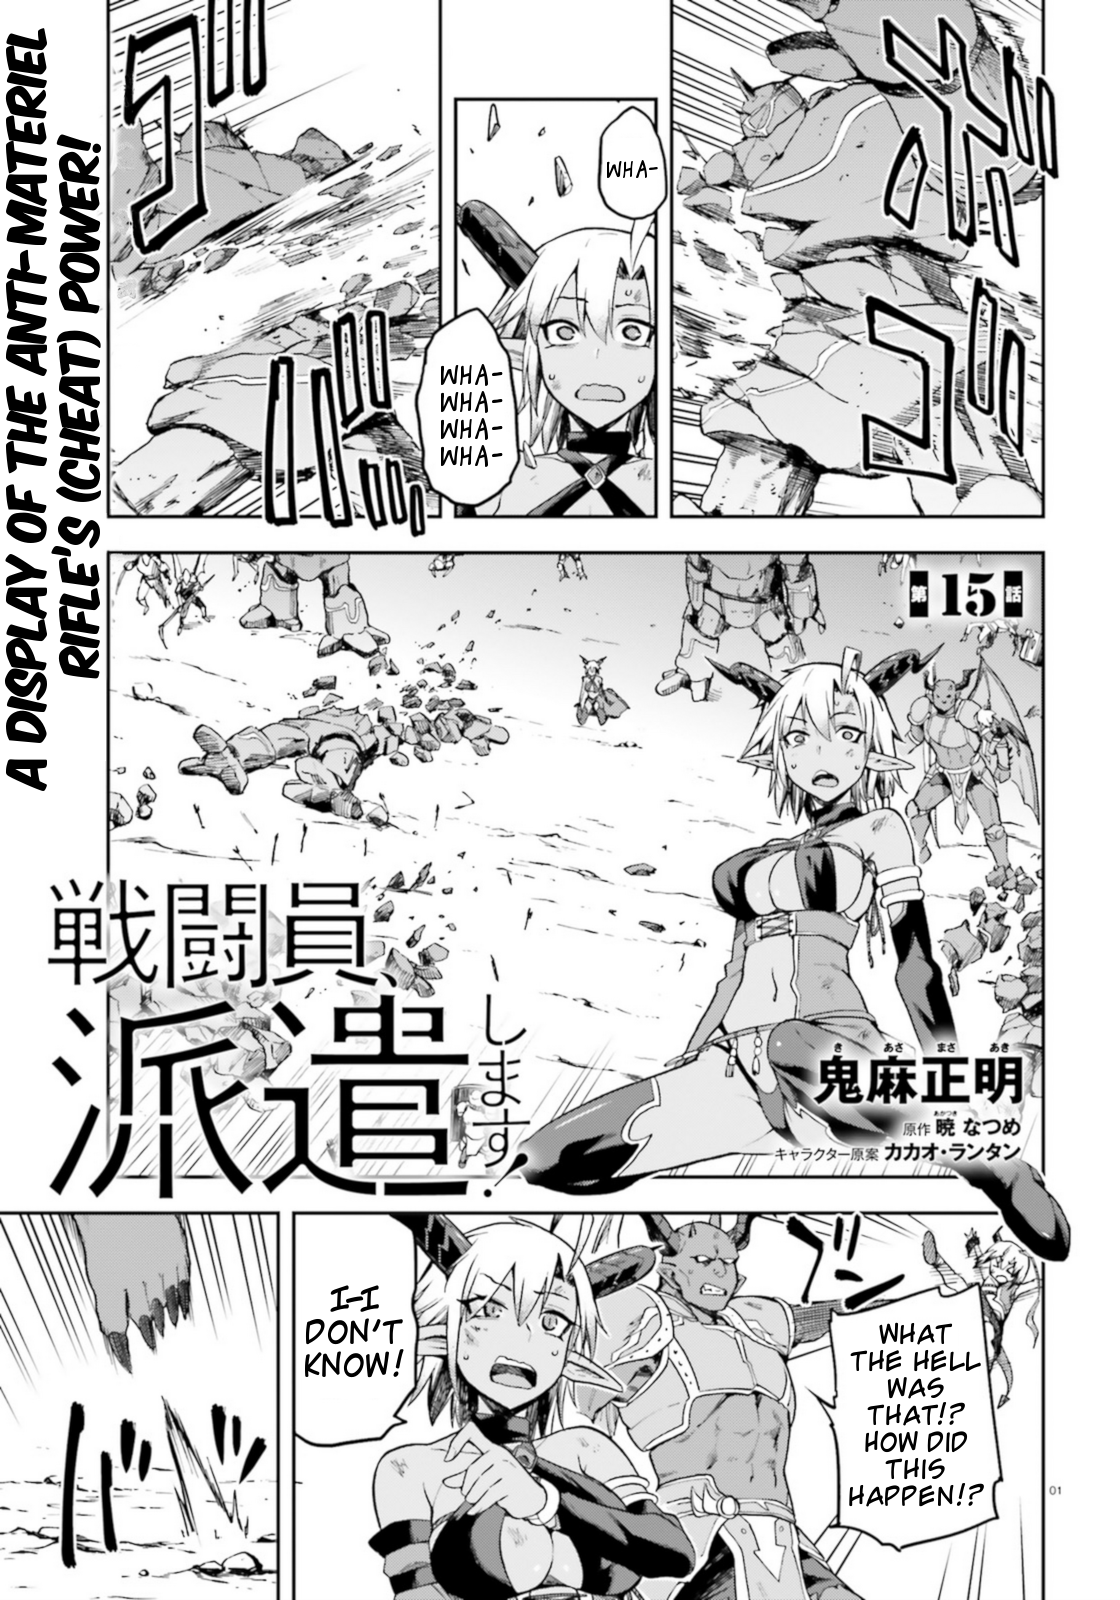 Combatants Will Be Dispatched! Vol.3 Chapter 15